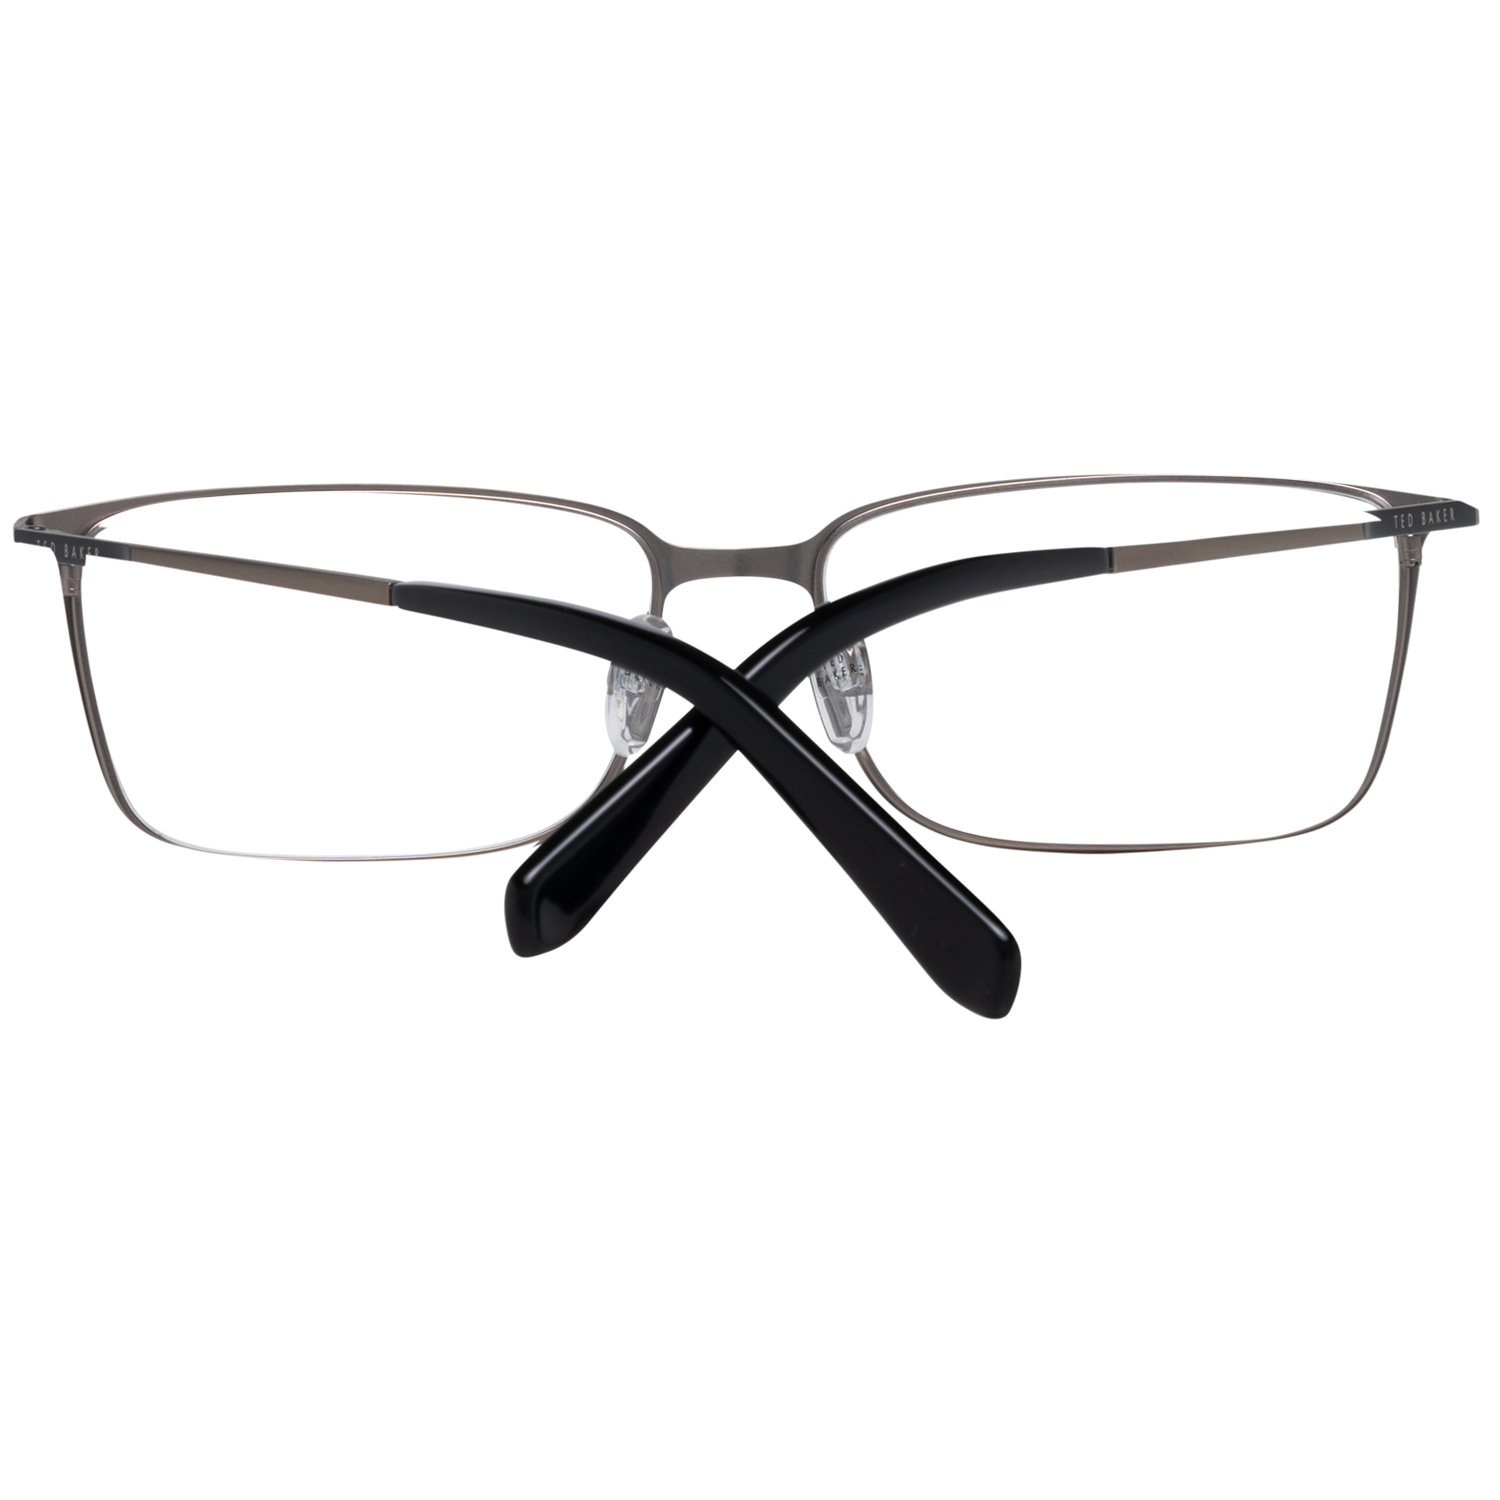 Ted Baker Optical Frame TB4303 001 59 Foster
Extra: No extra
Frame color: Black
Lenses color: Demo glasses
Lenses material: Plastic
Filter category: None
Style: Rectangle
Lenses effect: No Extra
Protection: None
Lenses width: 57
Lenses height: 37
Bridge width: 16
Frame width: 145
Temples length: 145
Spring hinge: Yes
Shipment includes: Branded case, cleaning cloth
Rim style: Full-Rim